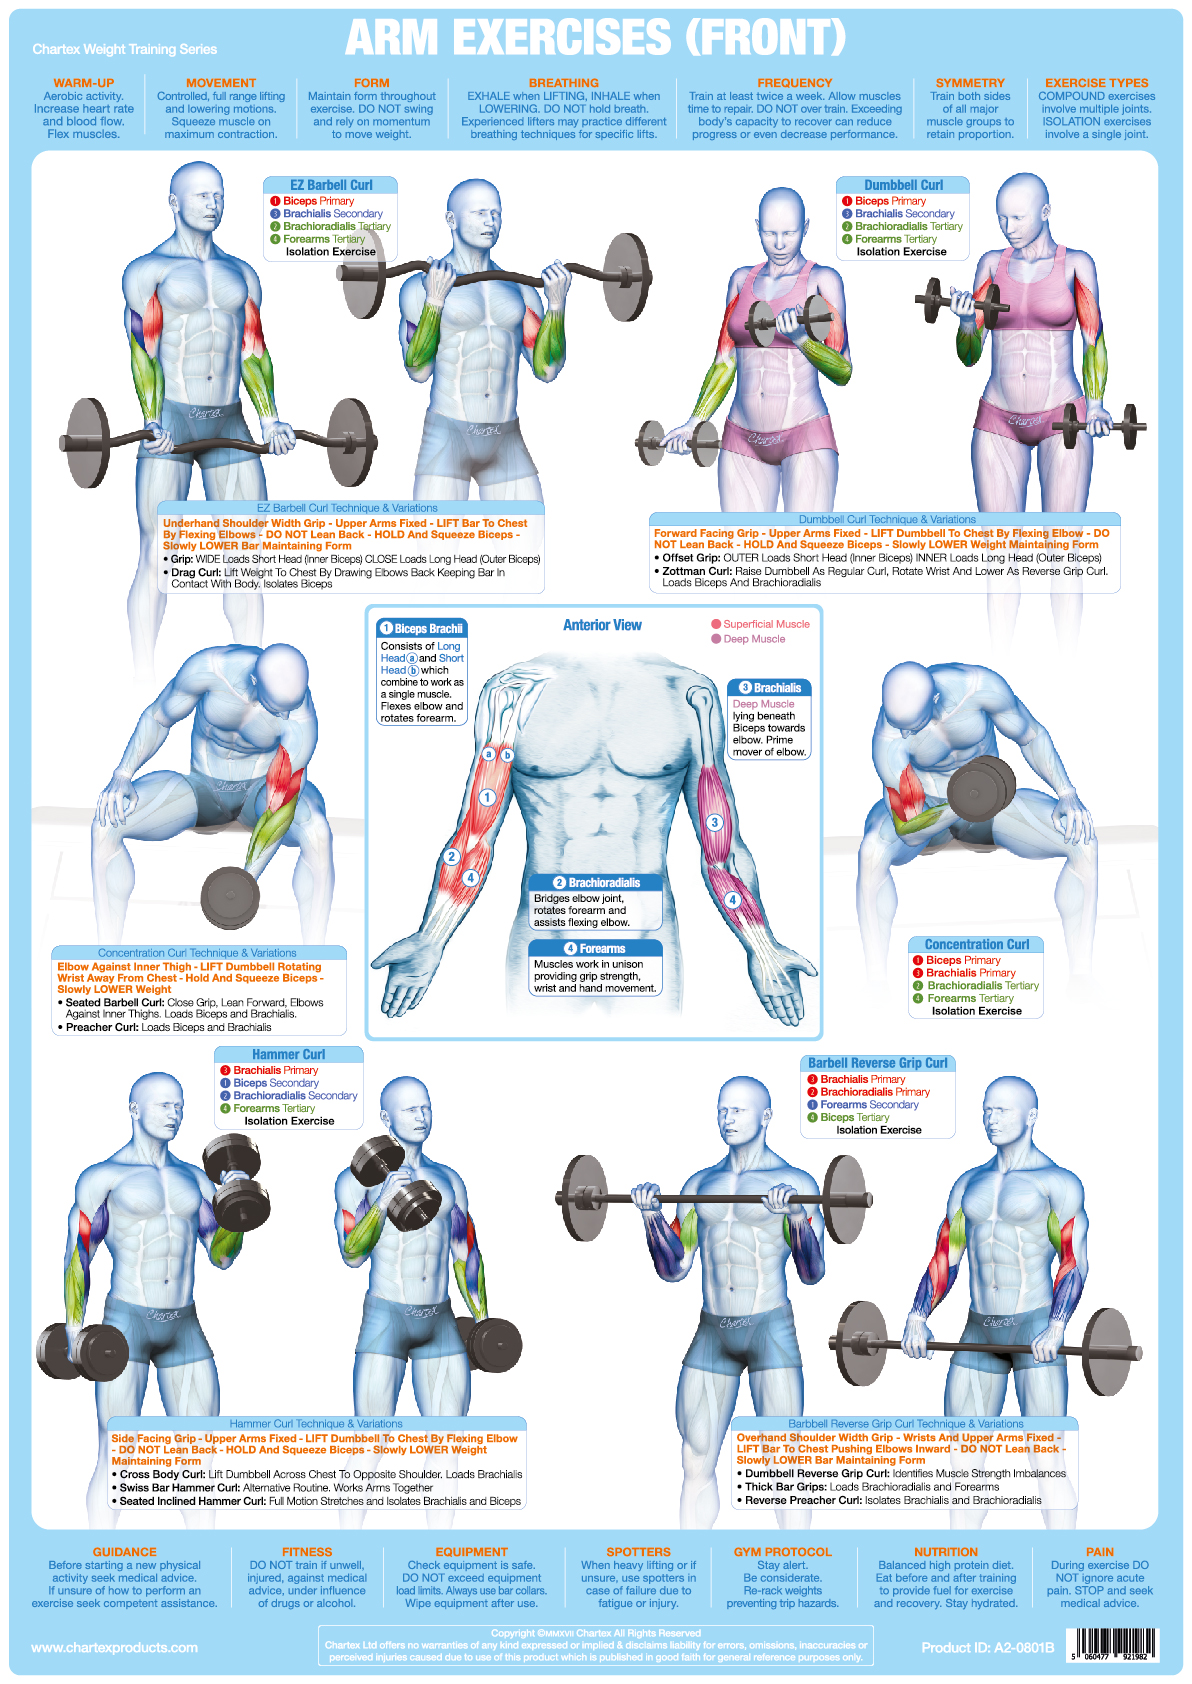 Arm Muscles (Front) Weight Training - A1 Chart